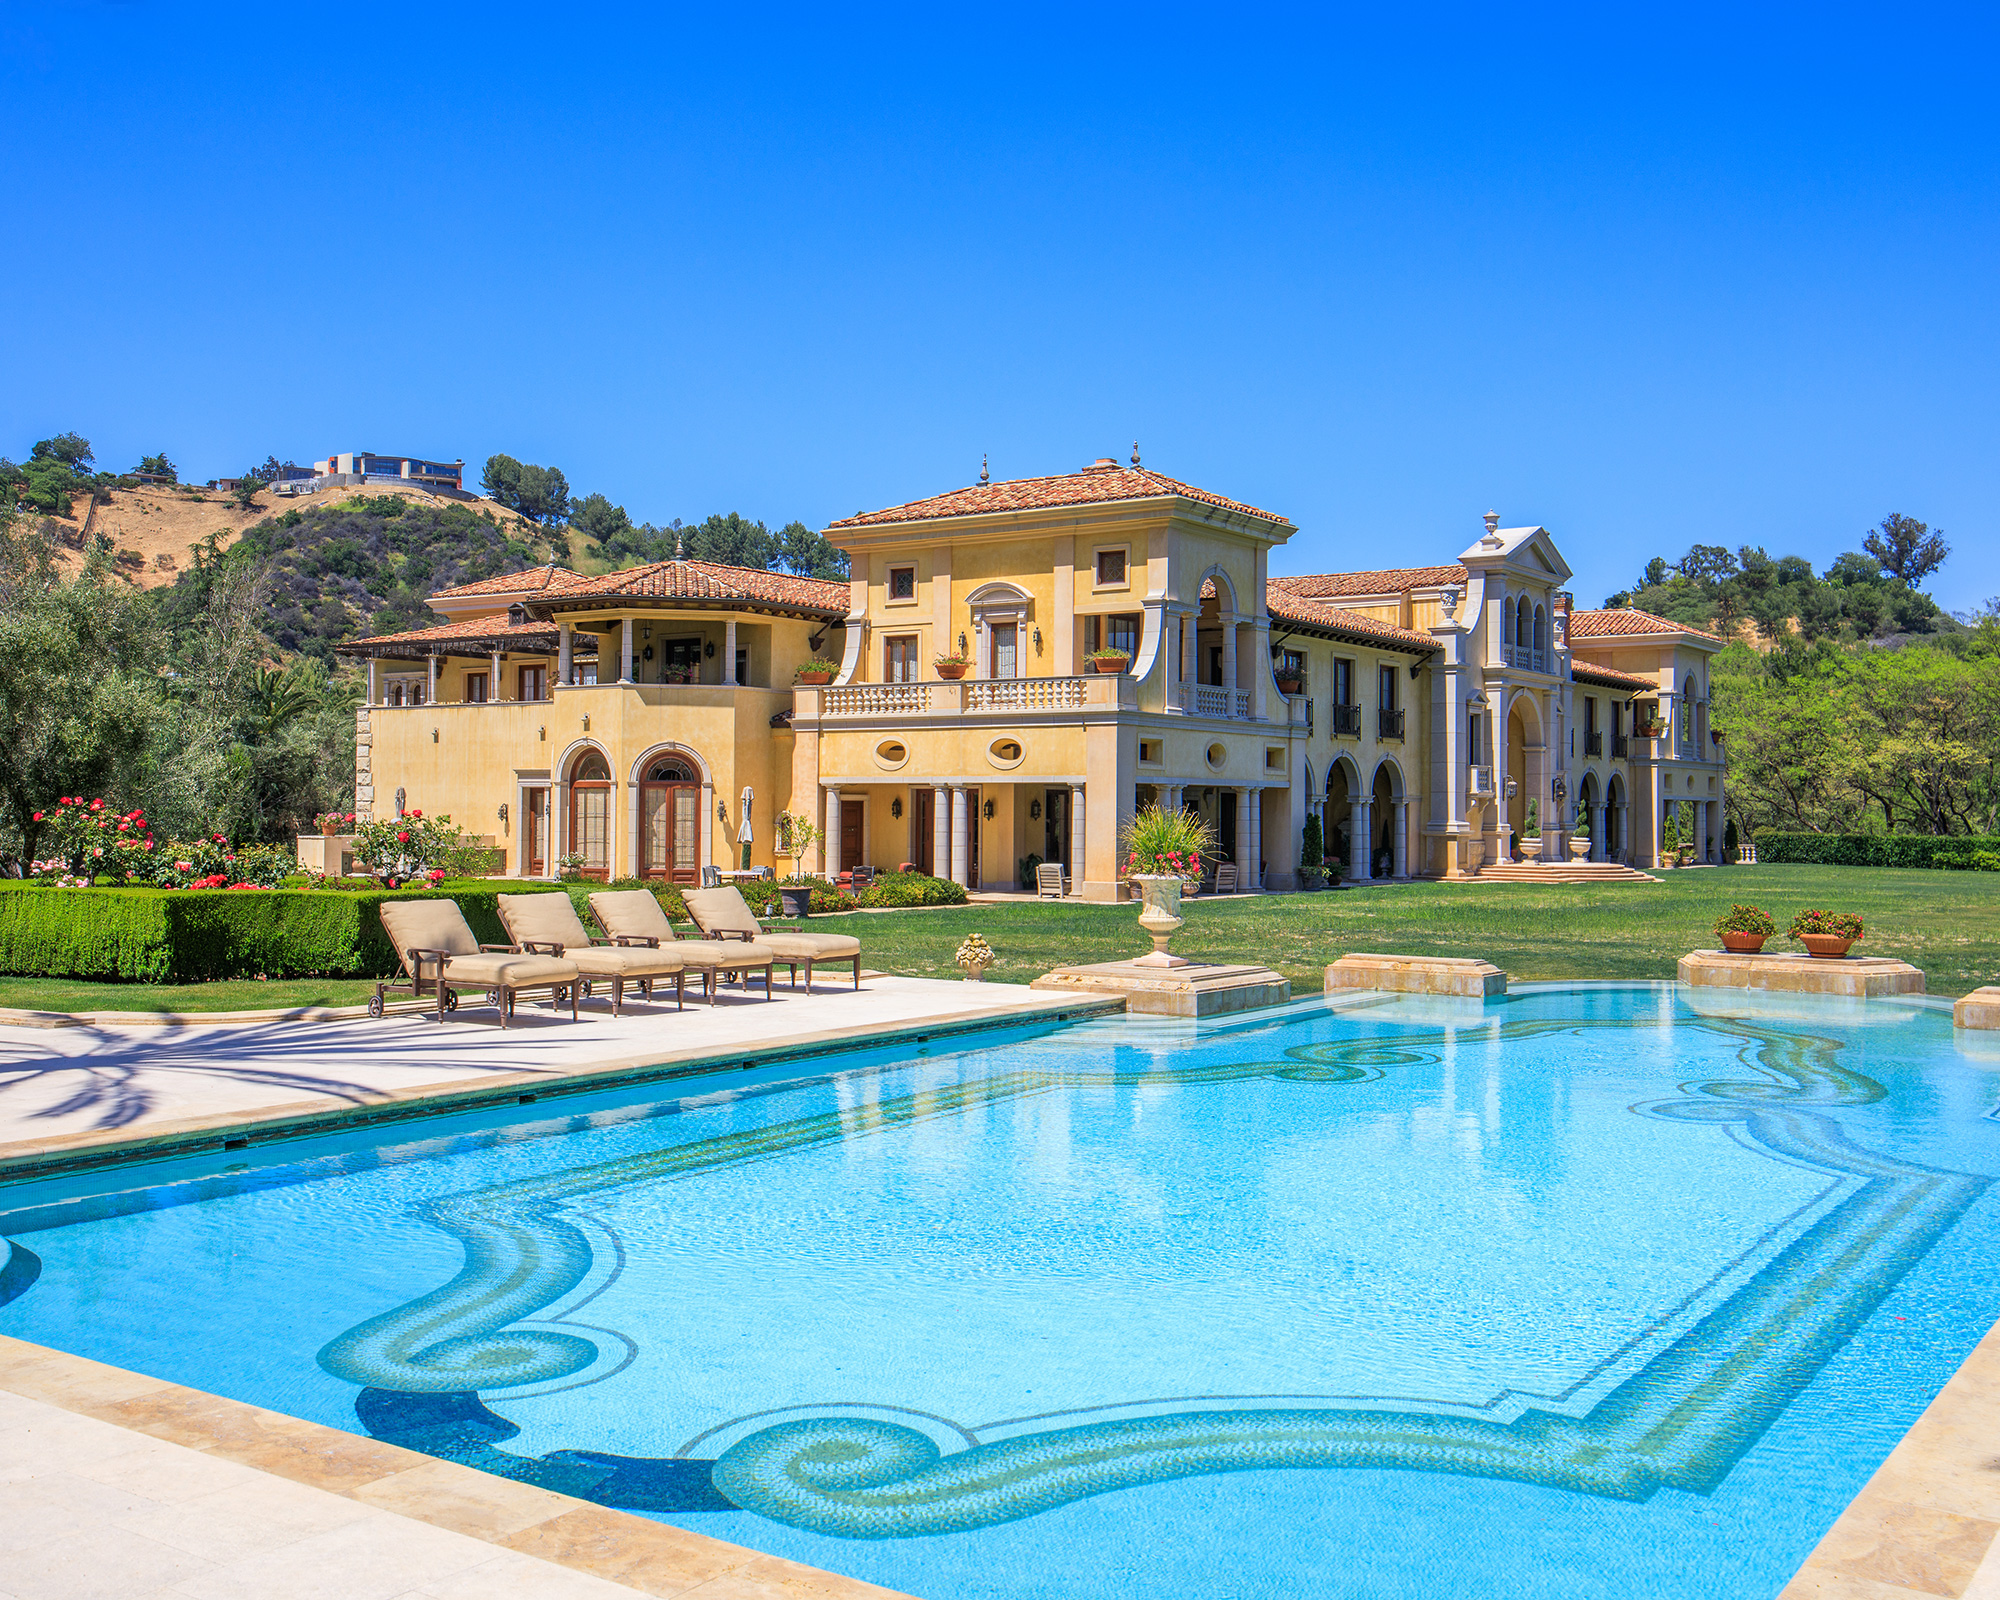 America's most expensive house is going to auction – and it is a must ...